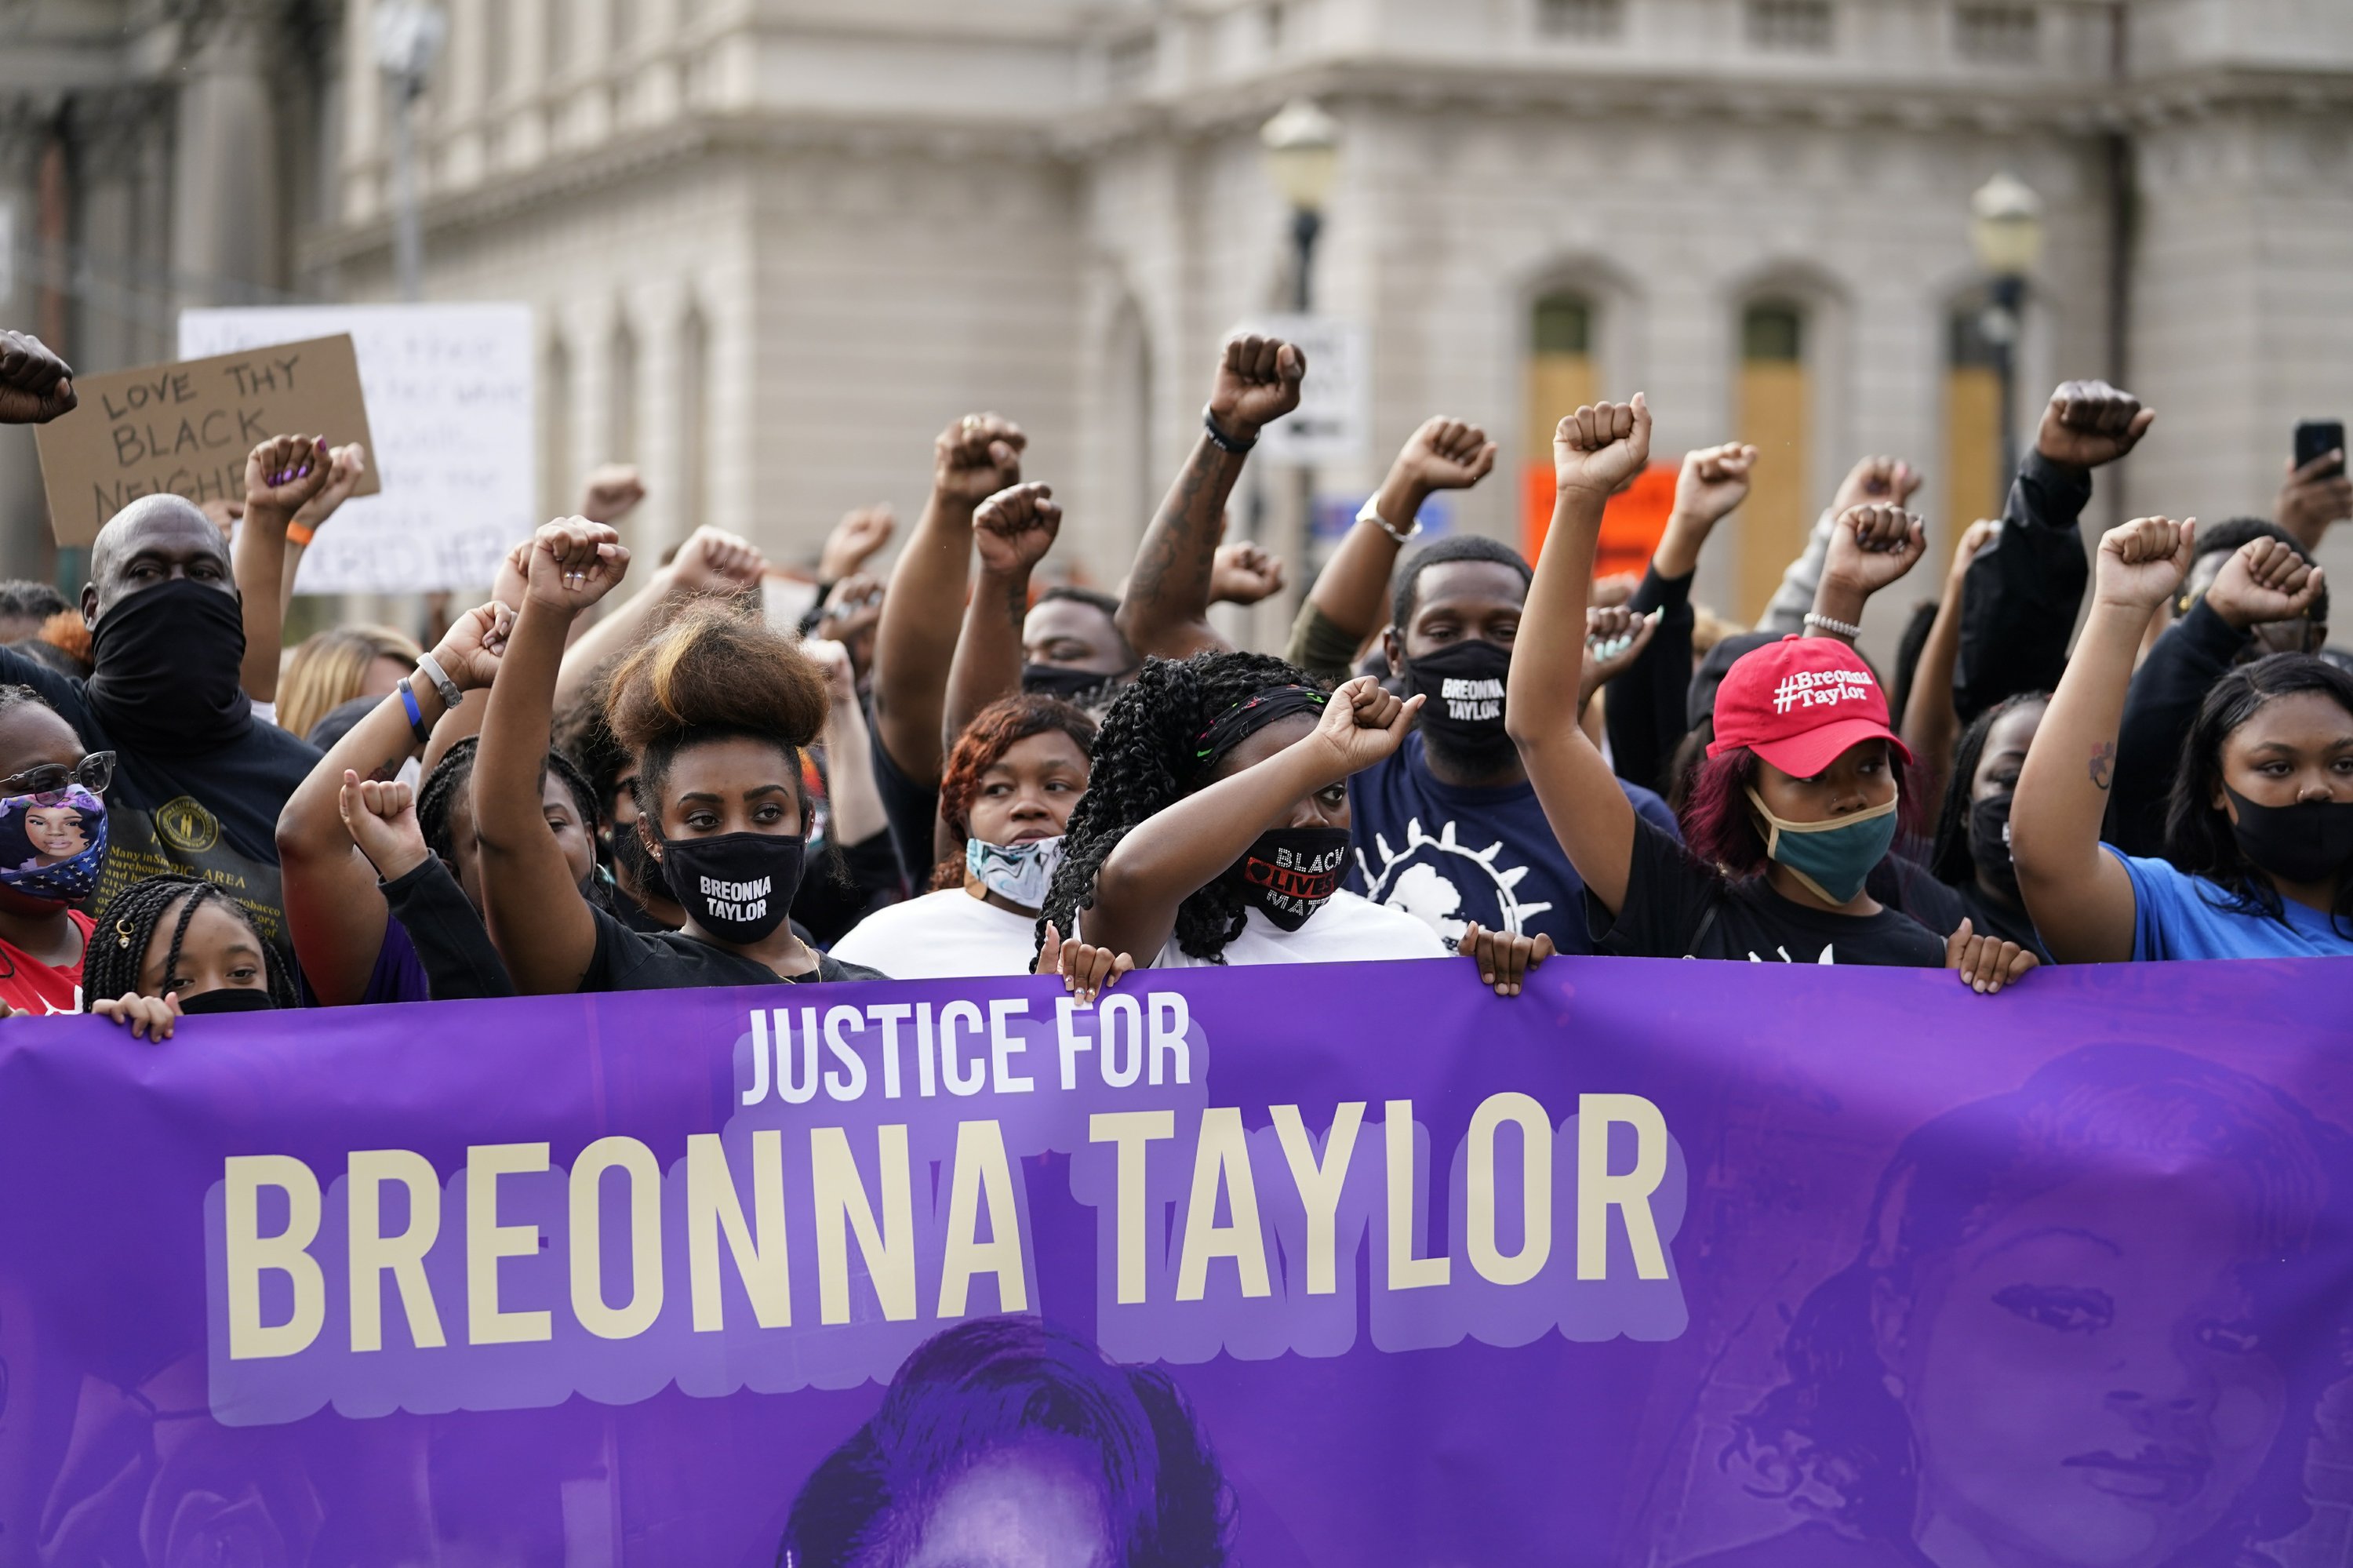 Rally in Kentucky: "Justice for Breonna Taylor".